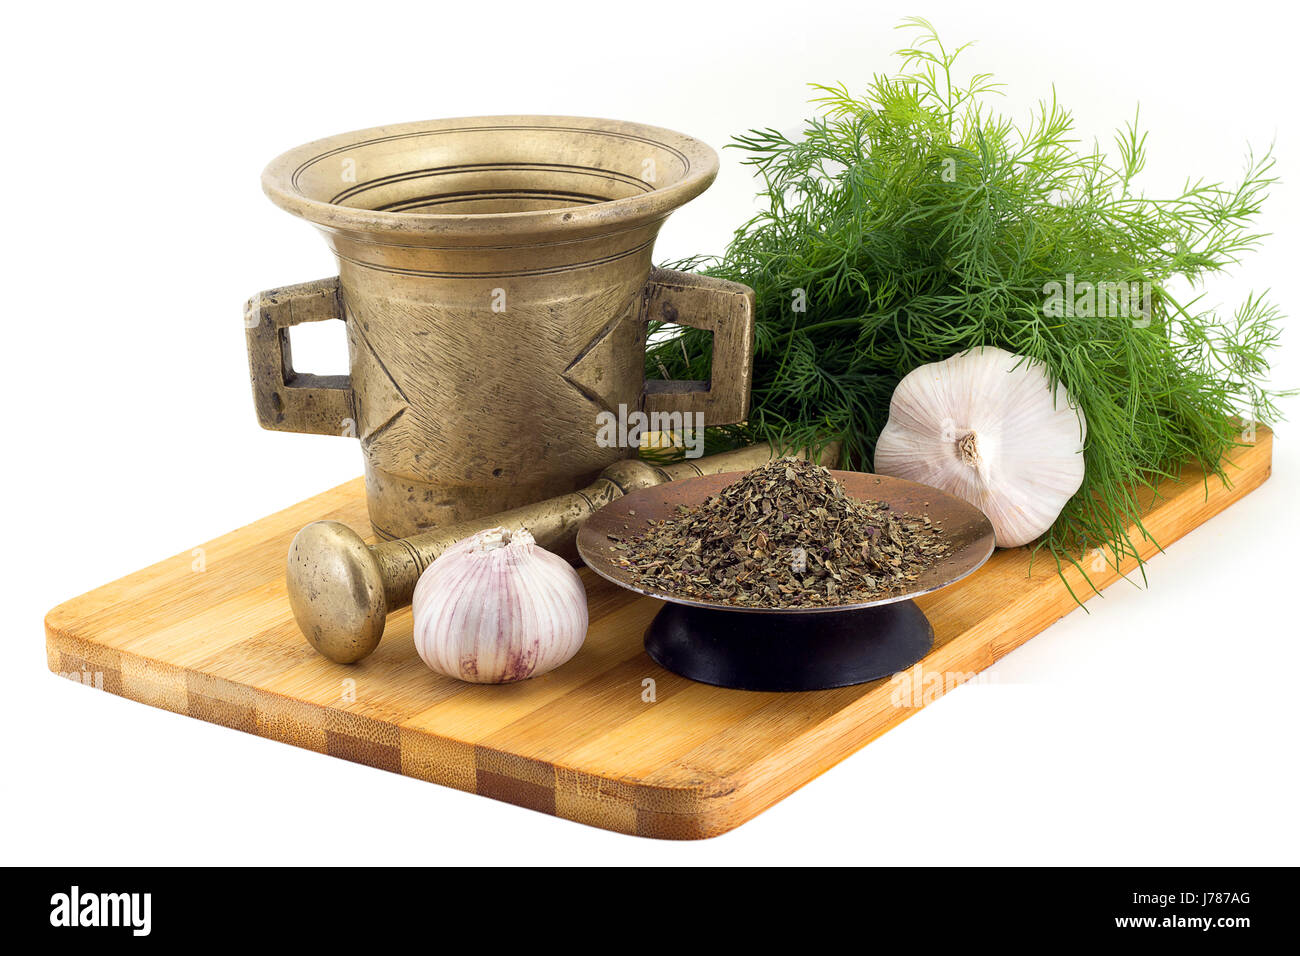 Still Life Spices, Basil ,marigold staminas in a copper vase on a wooden board on a background of a stern stupa for grinding spices, bunches of dill a Stock Photo